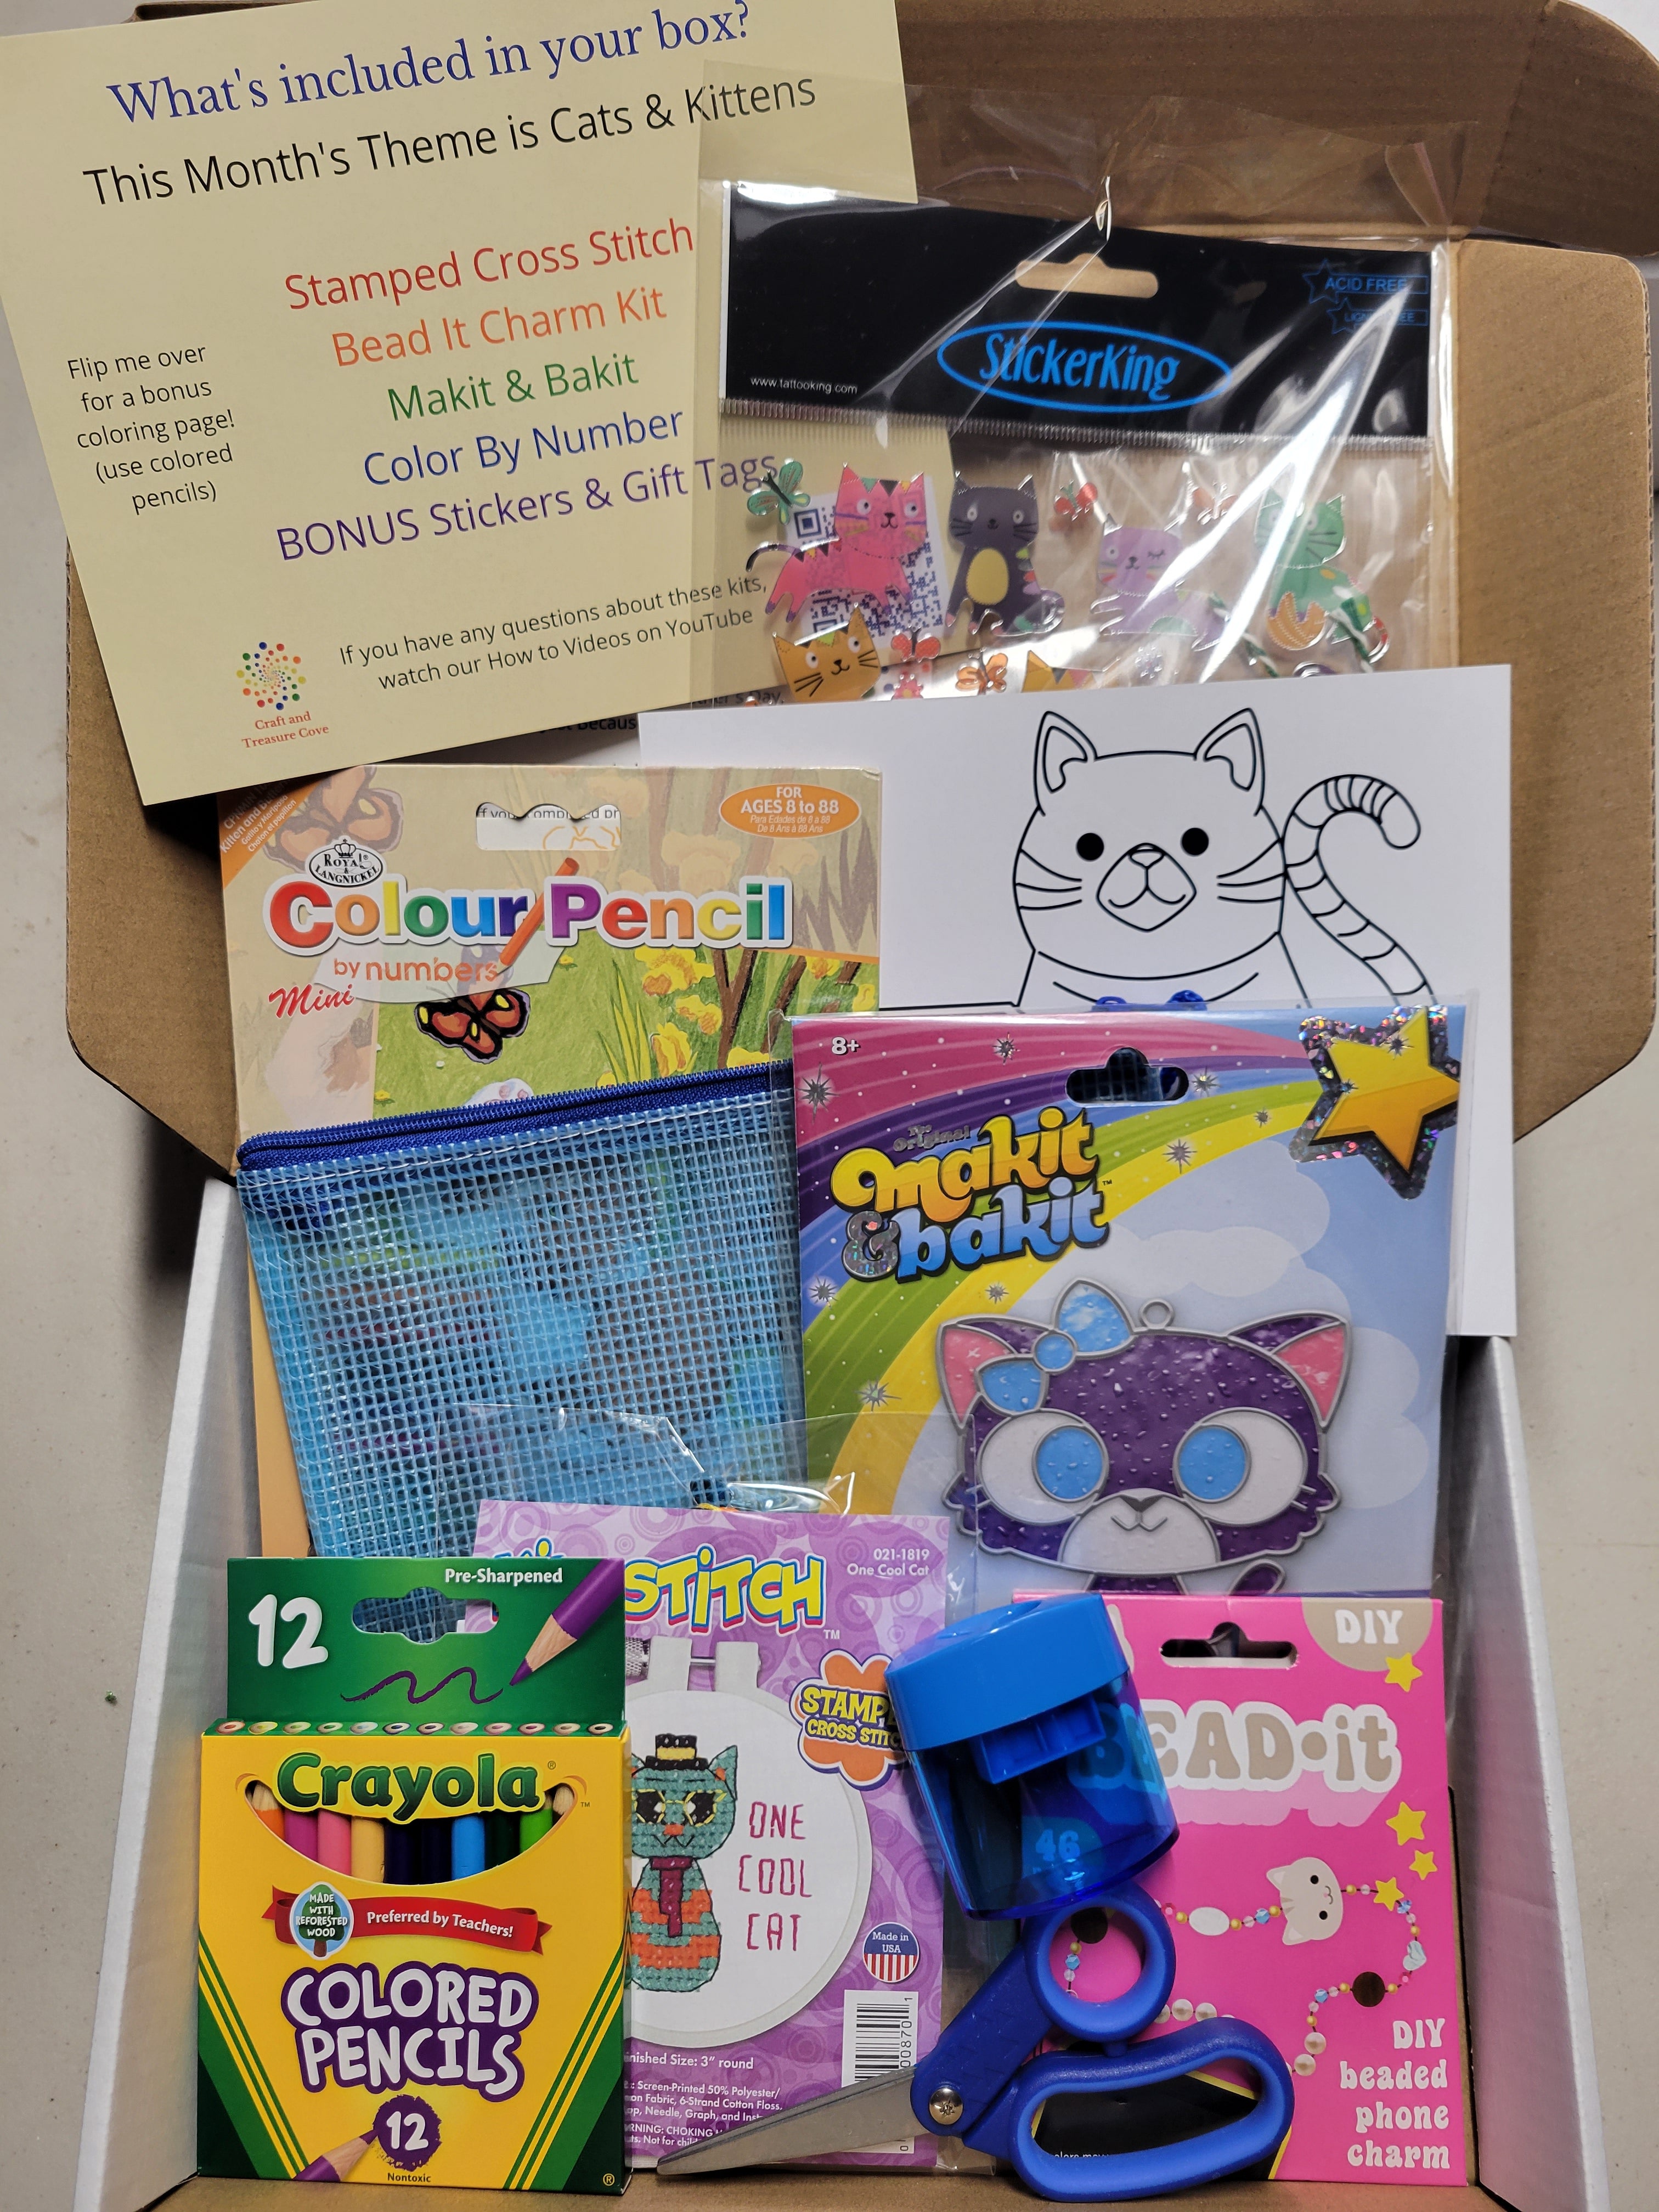 Craft 'n Stitch Cats Kittens Animals Crafts Gift Box for Kids Ages 7-9